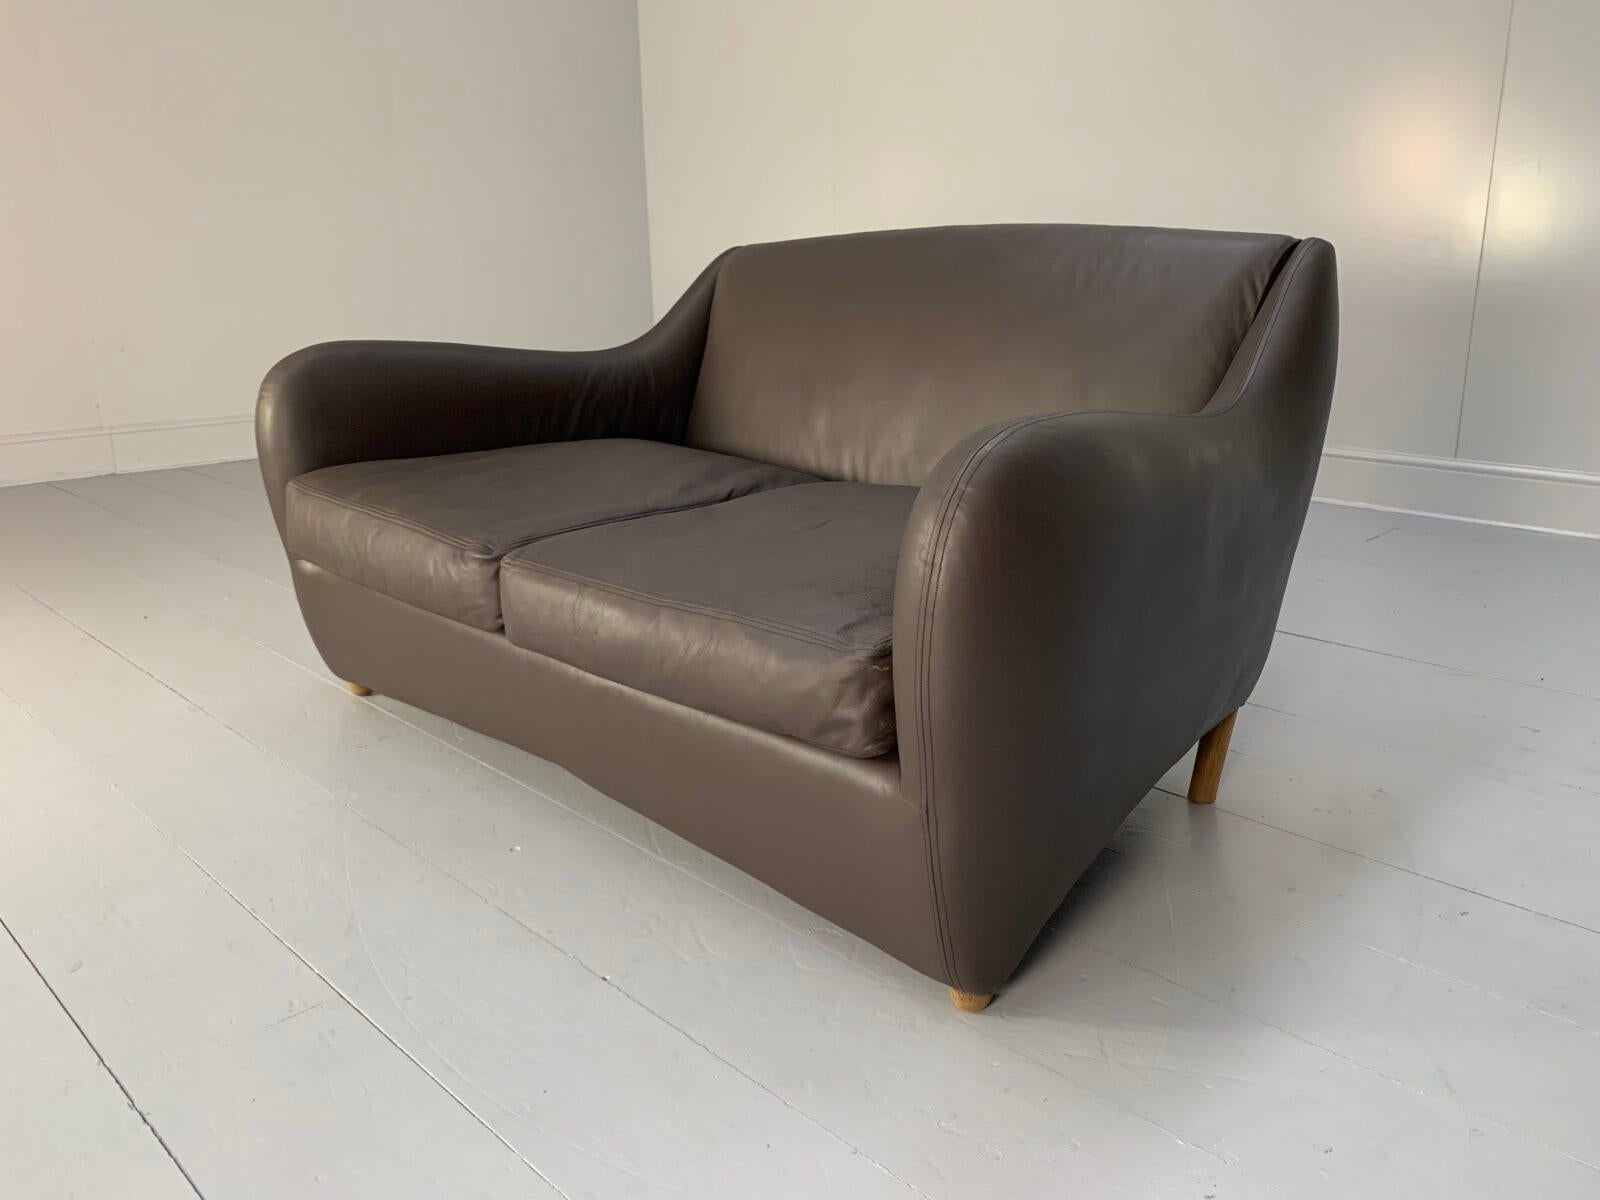 Hello Friends, and welcome to another unmissable offering from Lord Browns Furniture, the UK’s premier resource for fine Sofas and Chairs.

On offer on this occasion is a spectacularly-rare, undeniably-handsome iconic “Balzac” 2-Seat Sofa, dressed